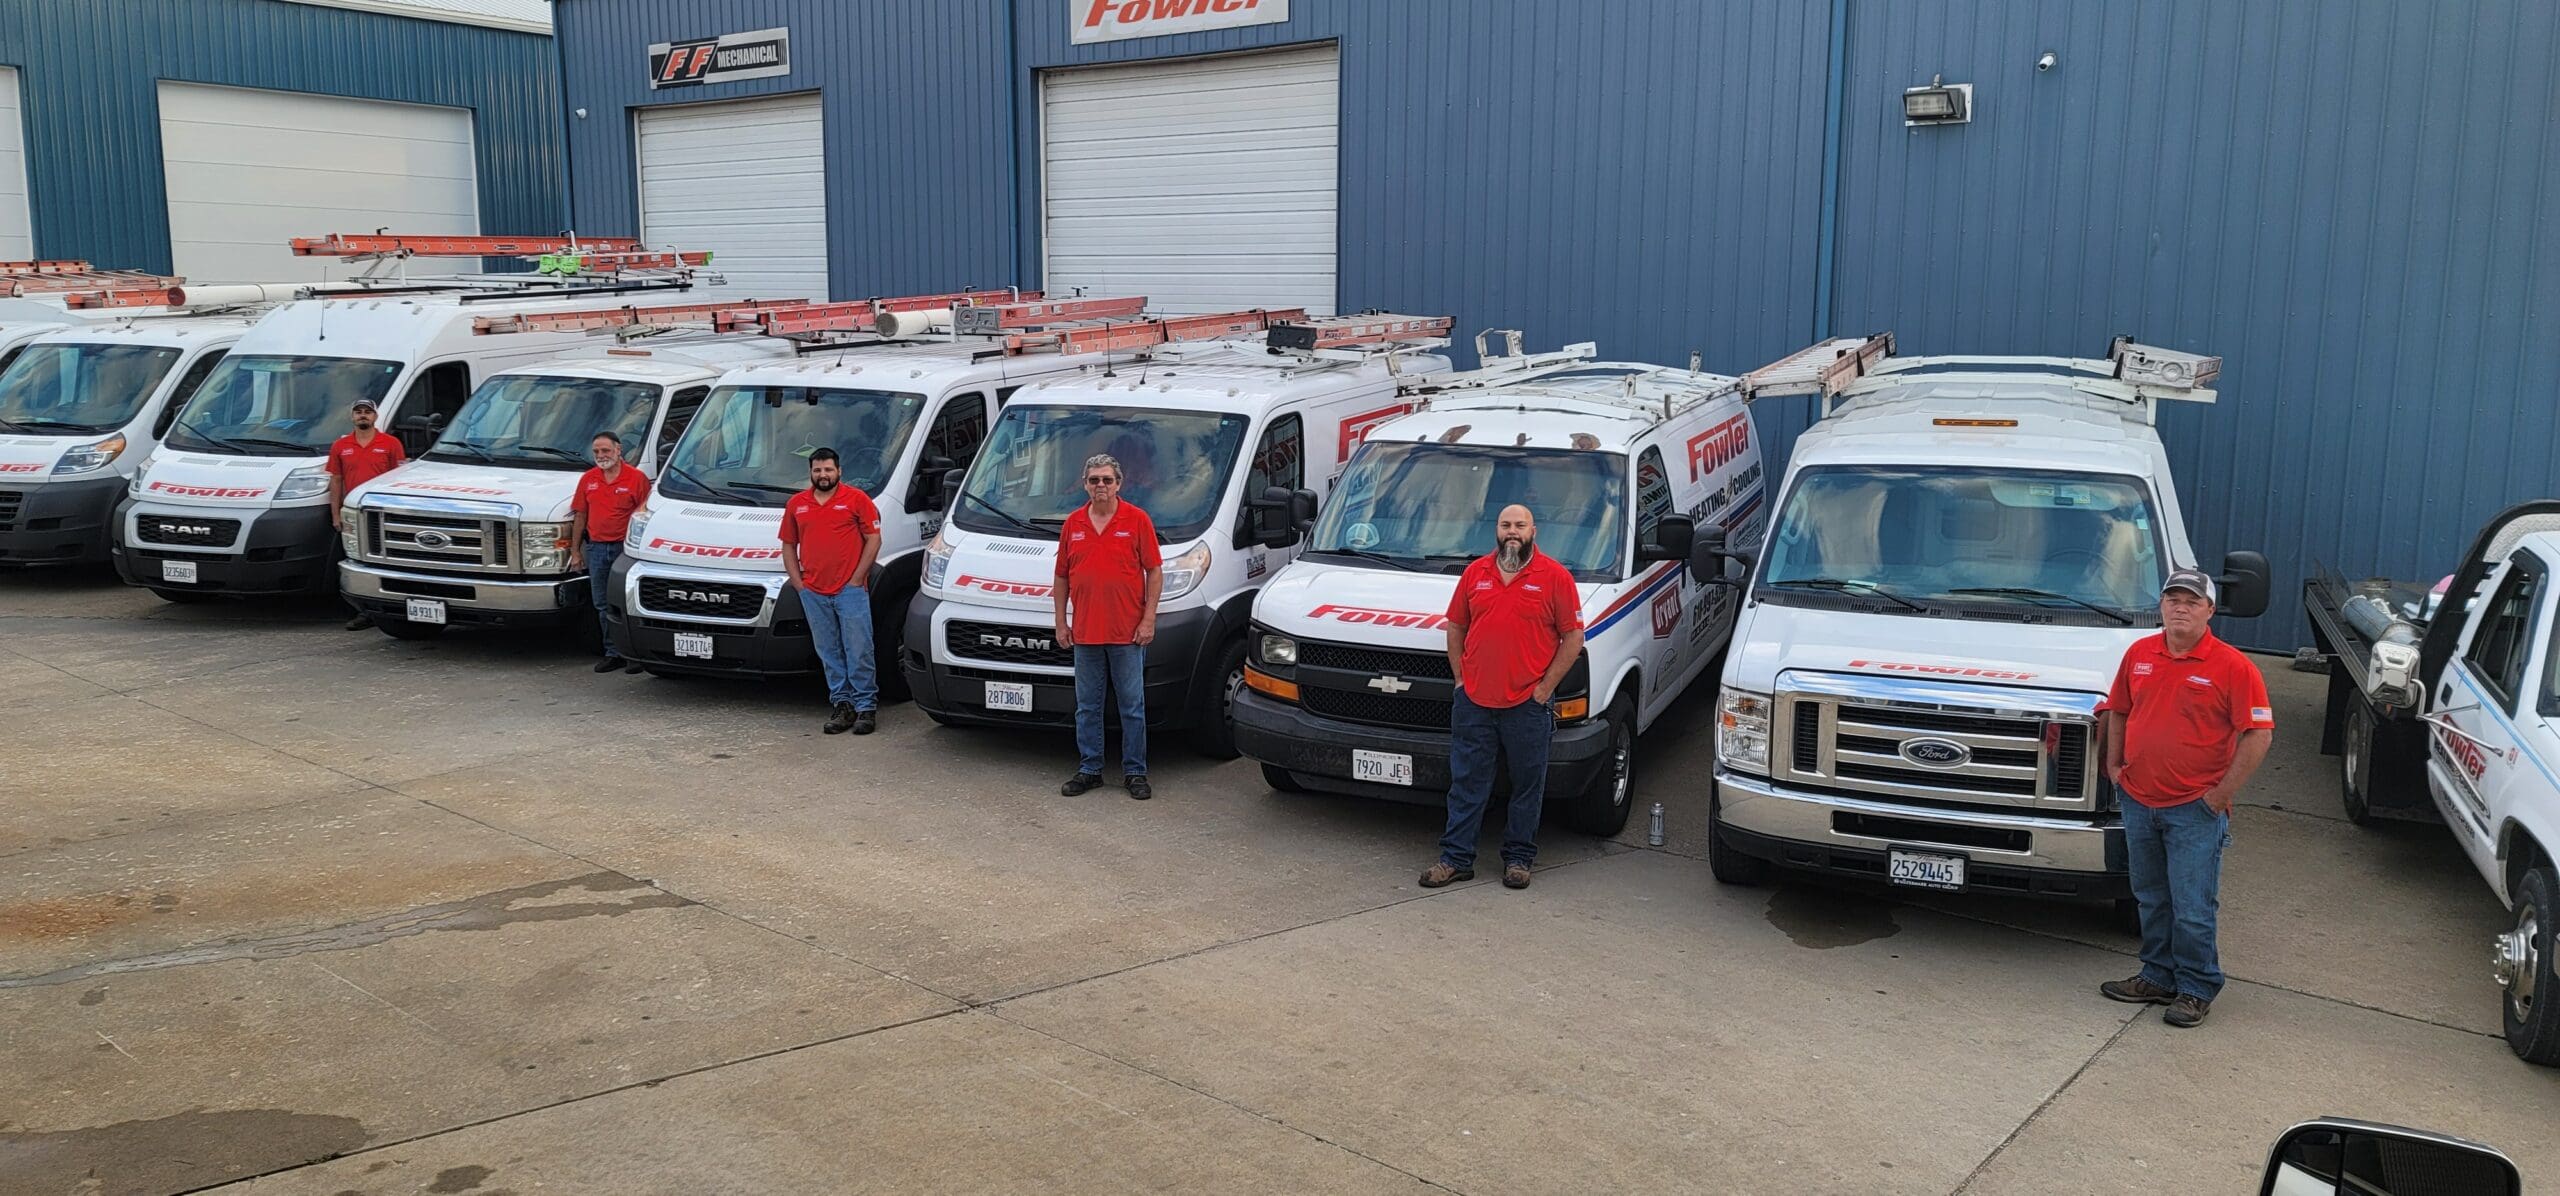 fowler heating and cooling service technicians